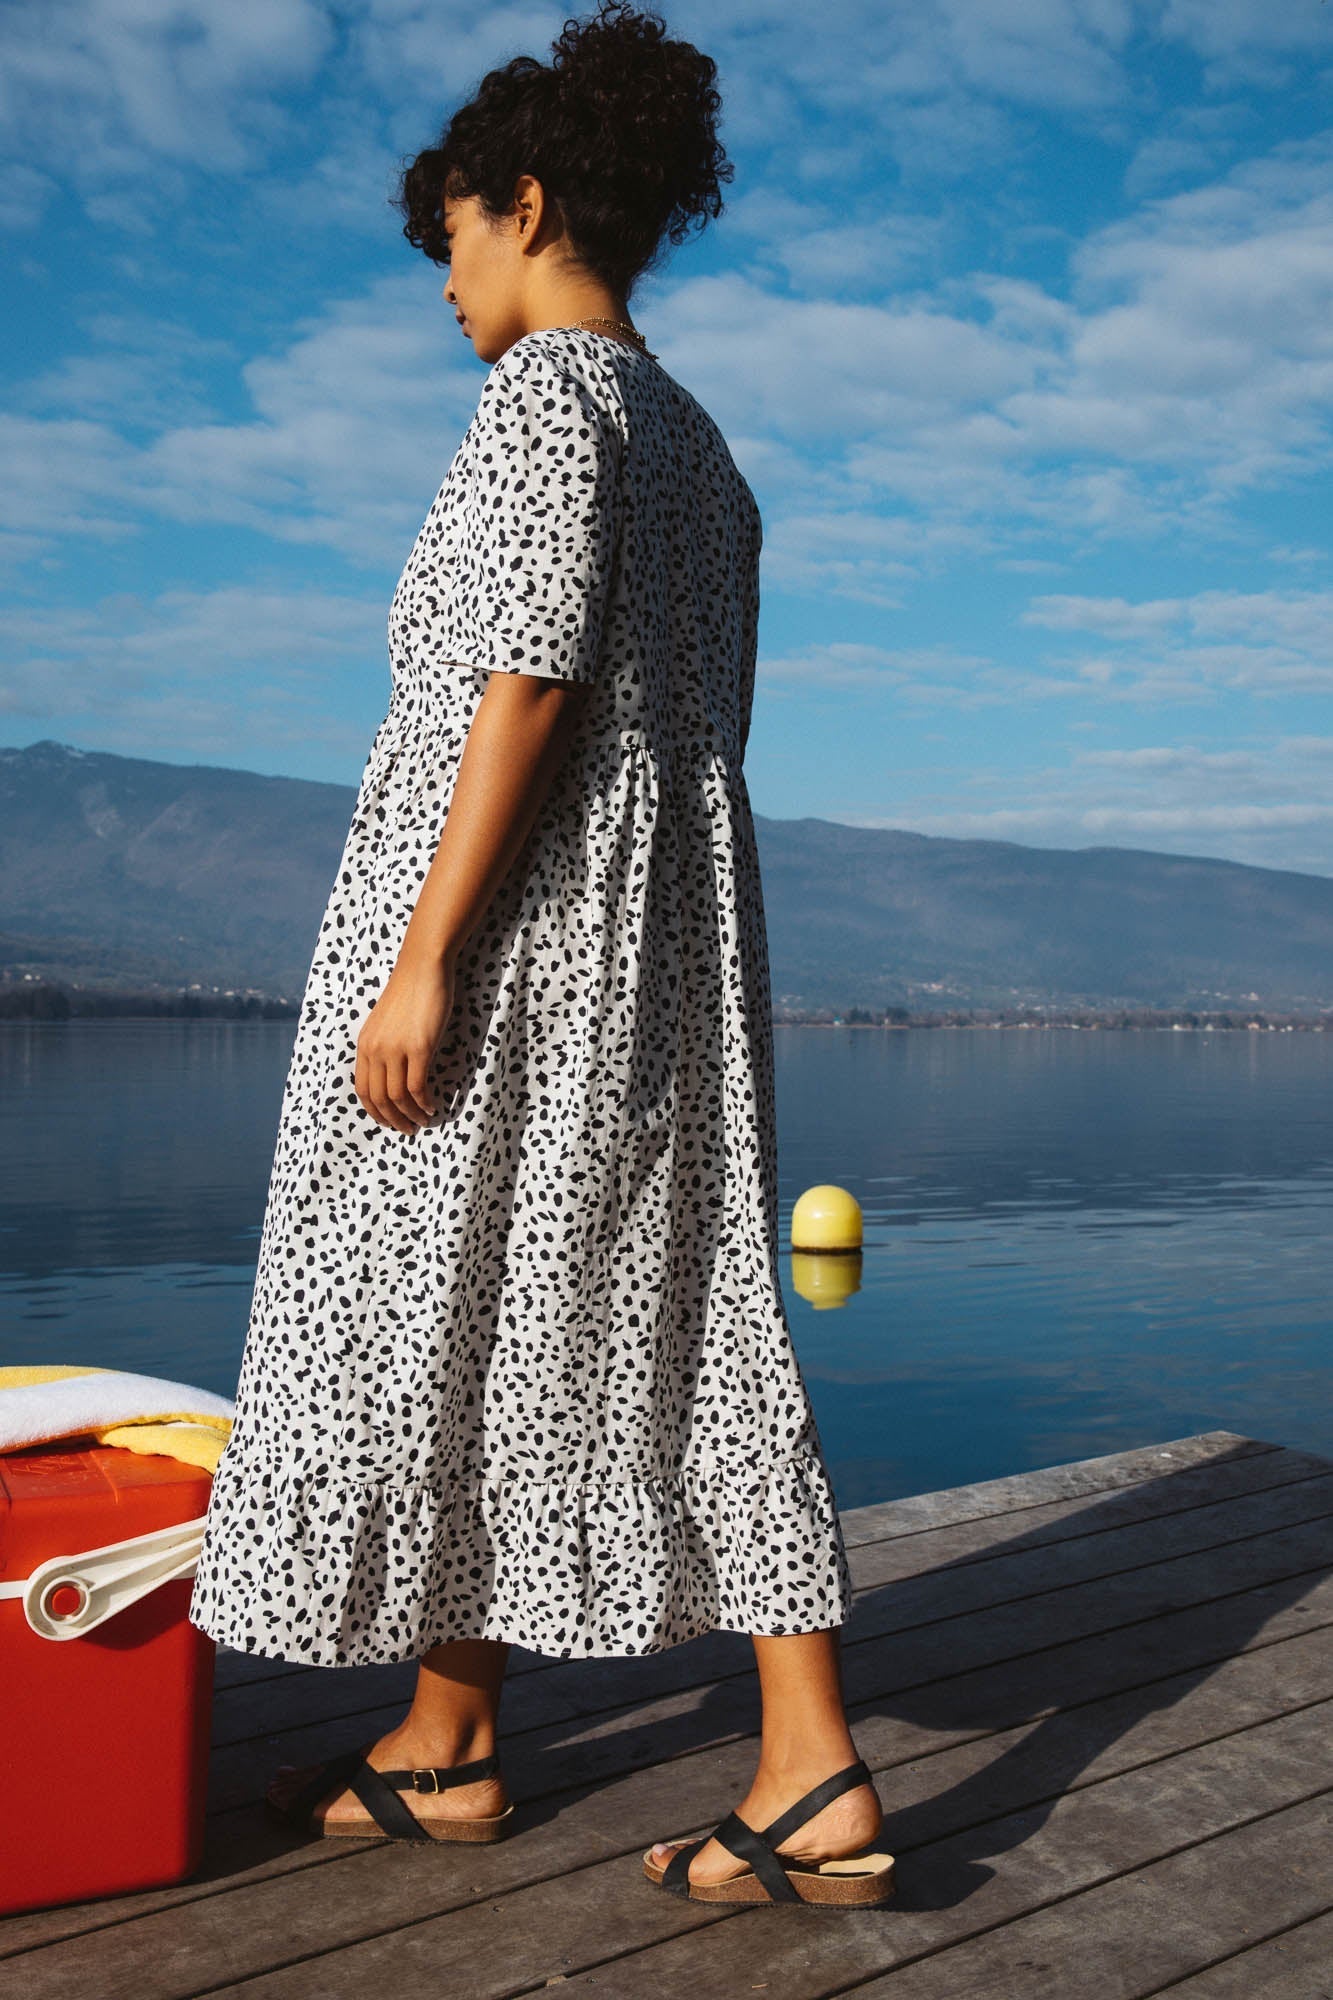 Victoire dress with black spotted print